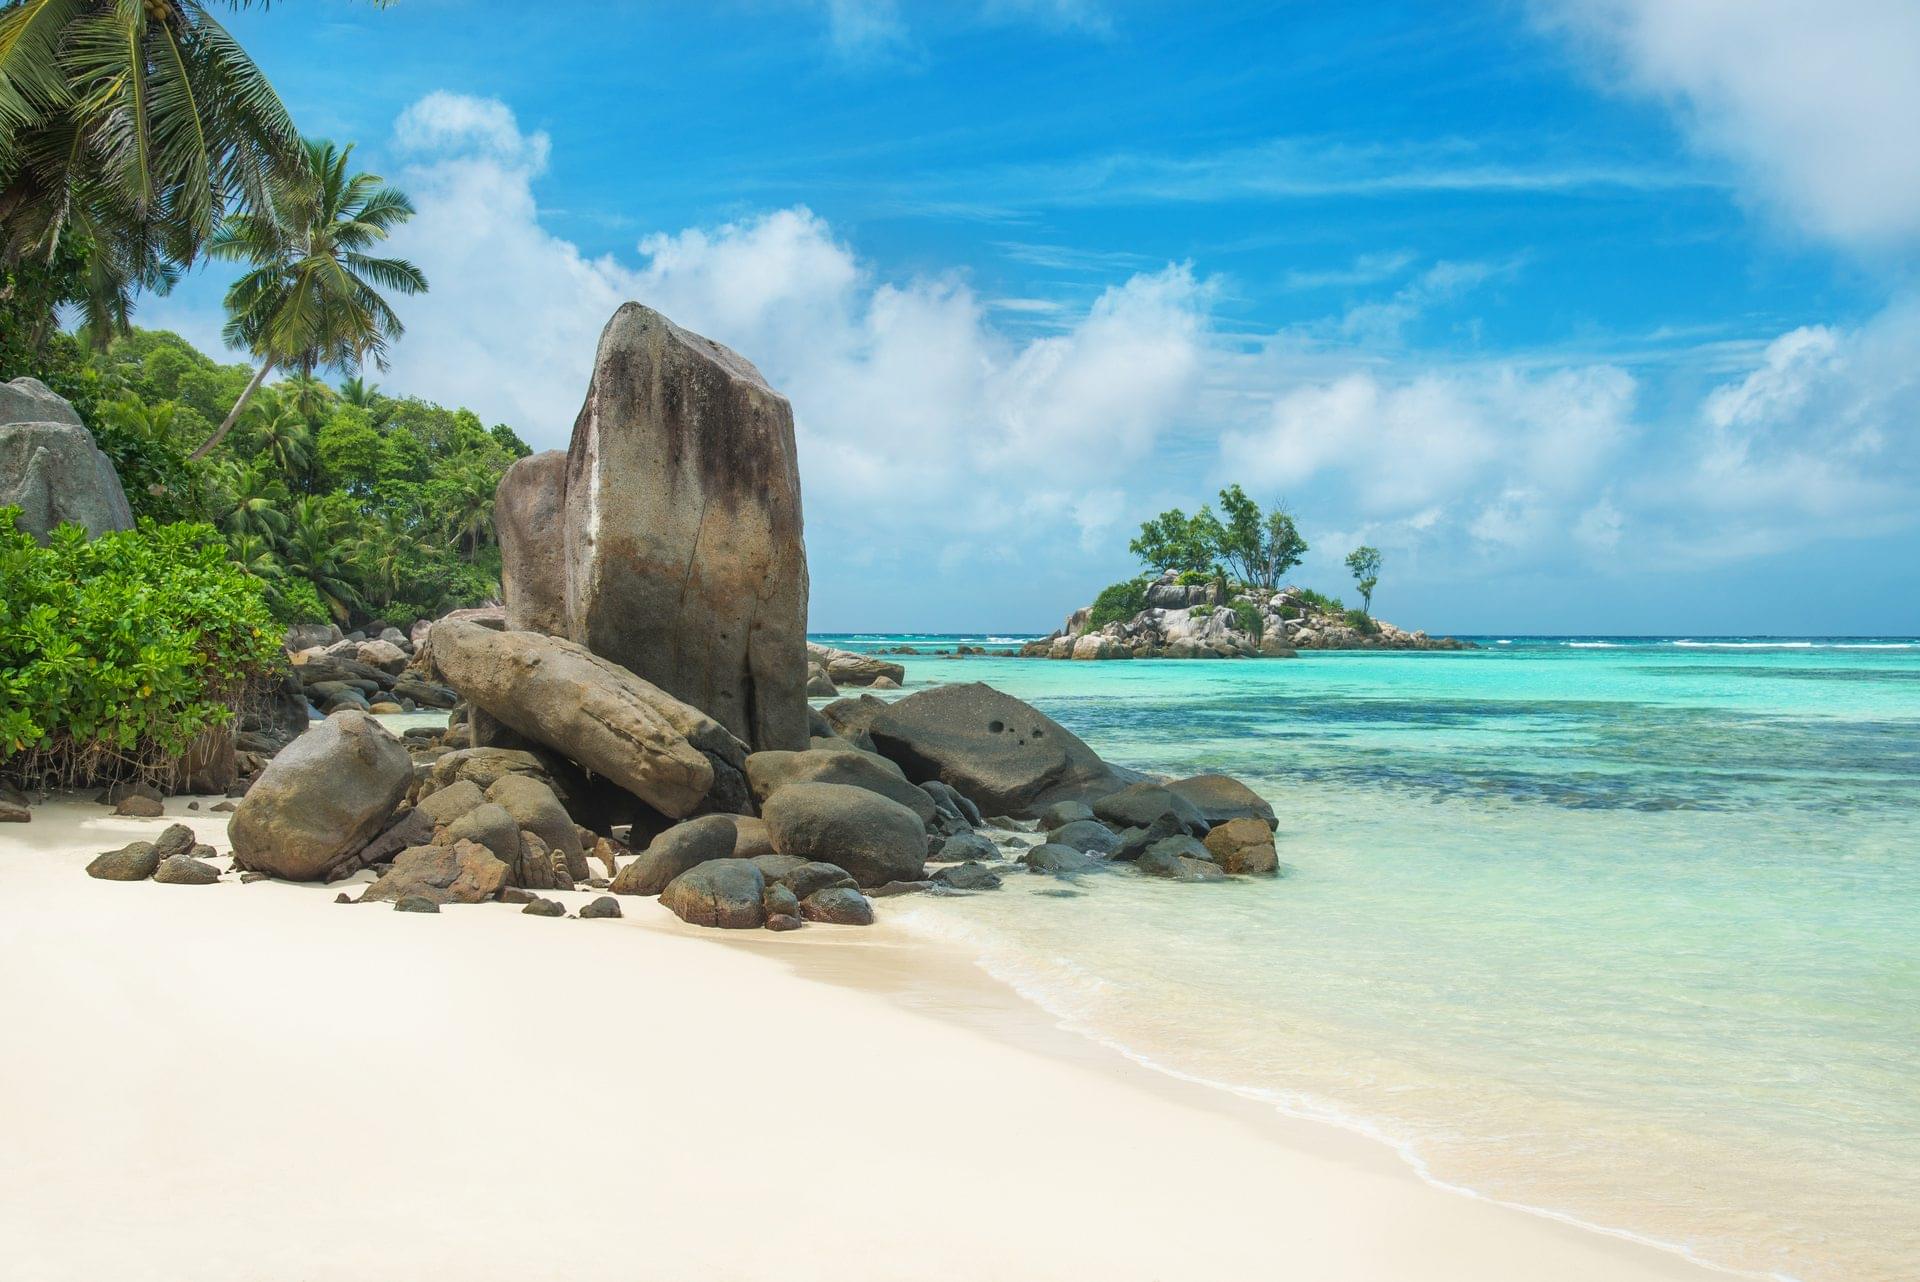 The azure waters and sandy white beaches of the Seychelles, one of the best destinations for scuba diving in the fall